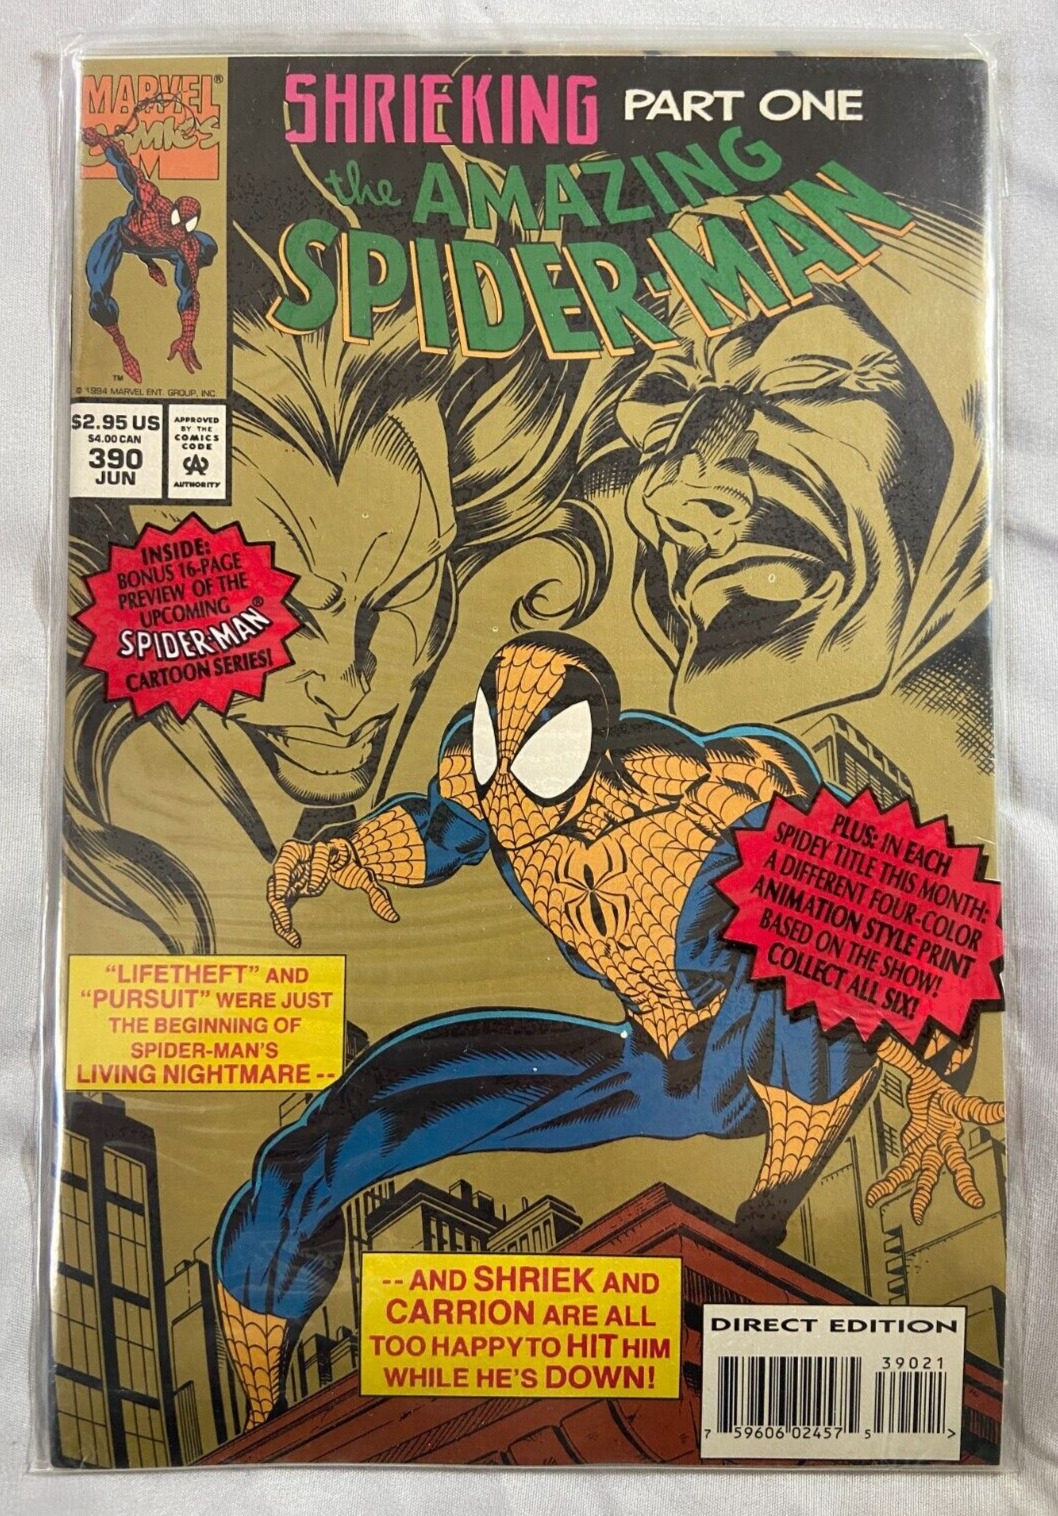 The Amazing Spider-Man, #390 NM Direct Edition Shrieking part 1 - Variant Cover